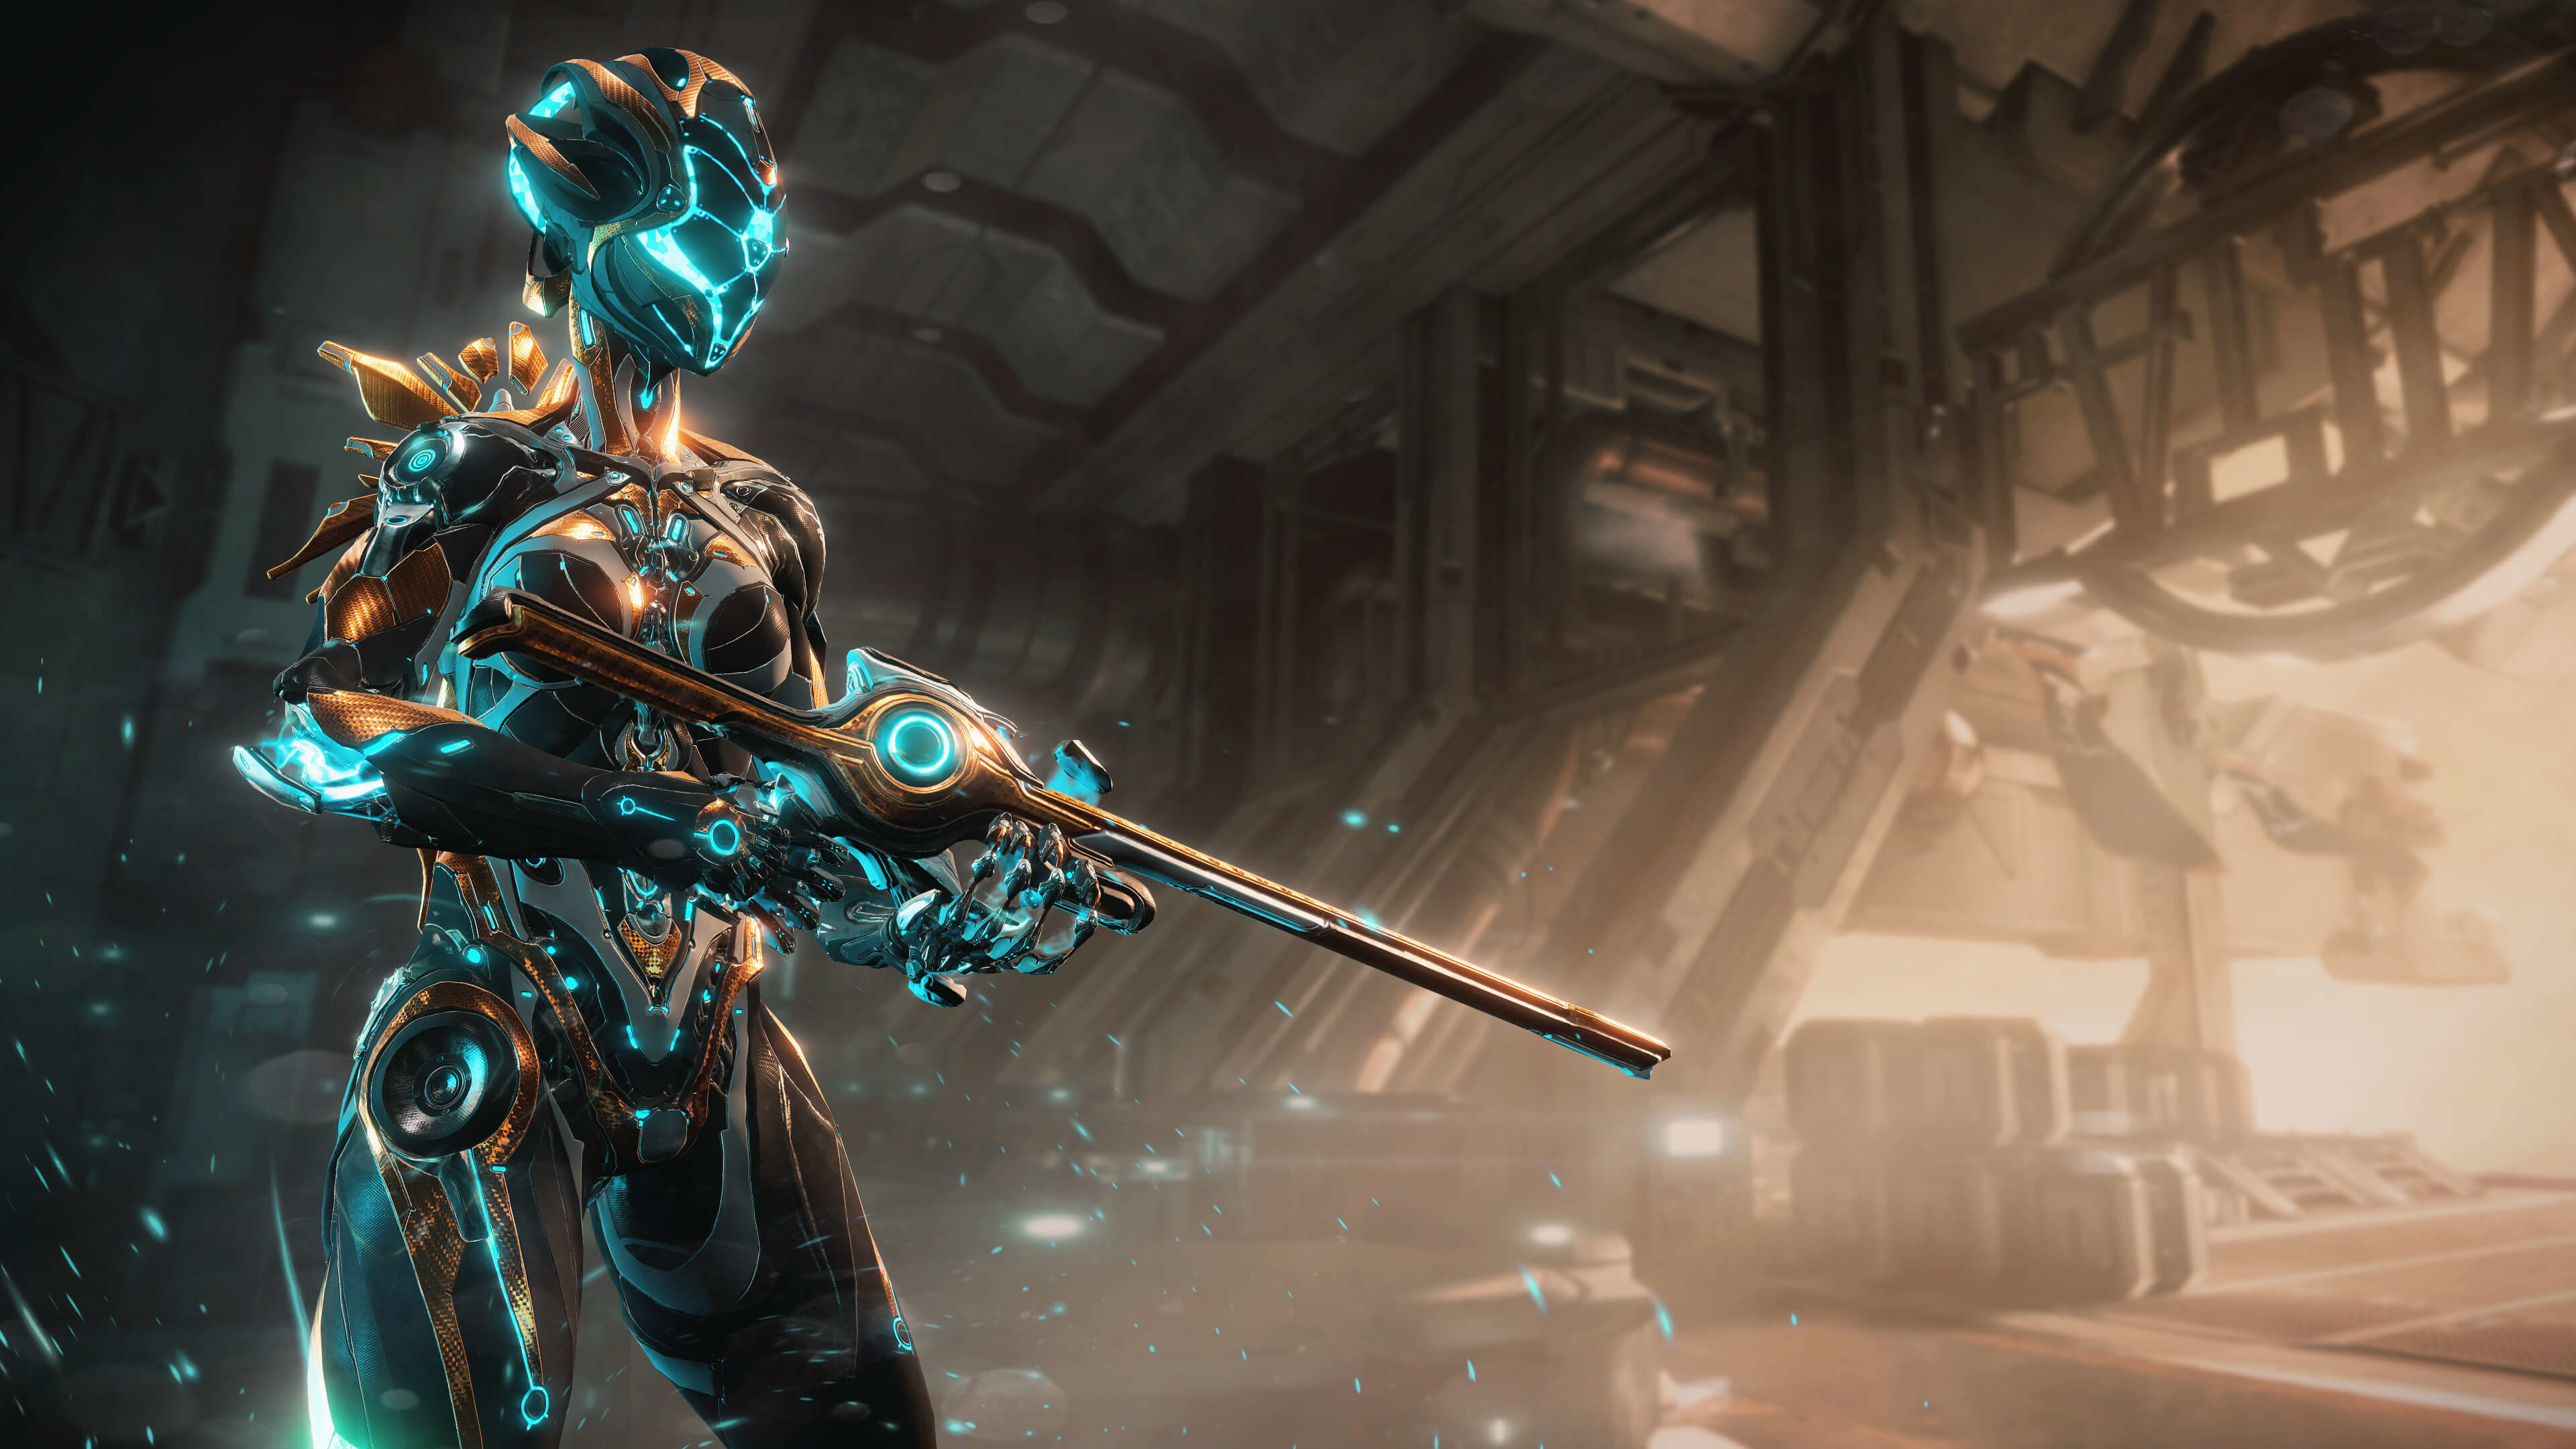 Operation Scarlet Spear Warframe Wallpaper Hd Games 4k Wallpapers Images Photos And Background